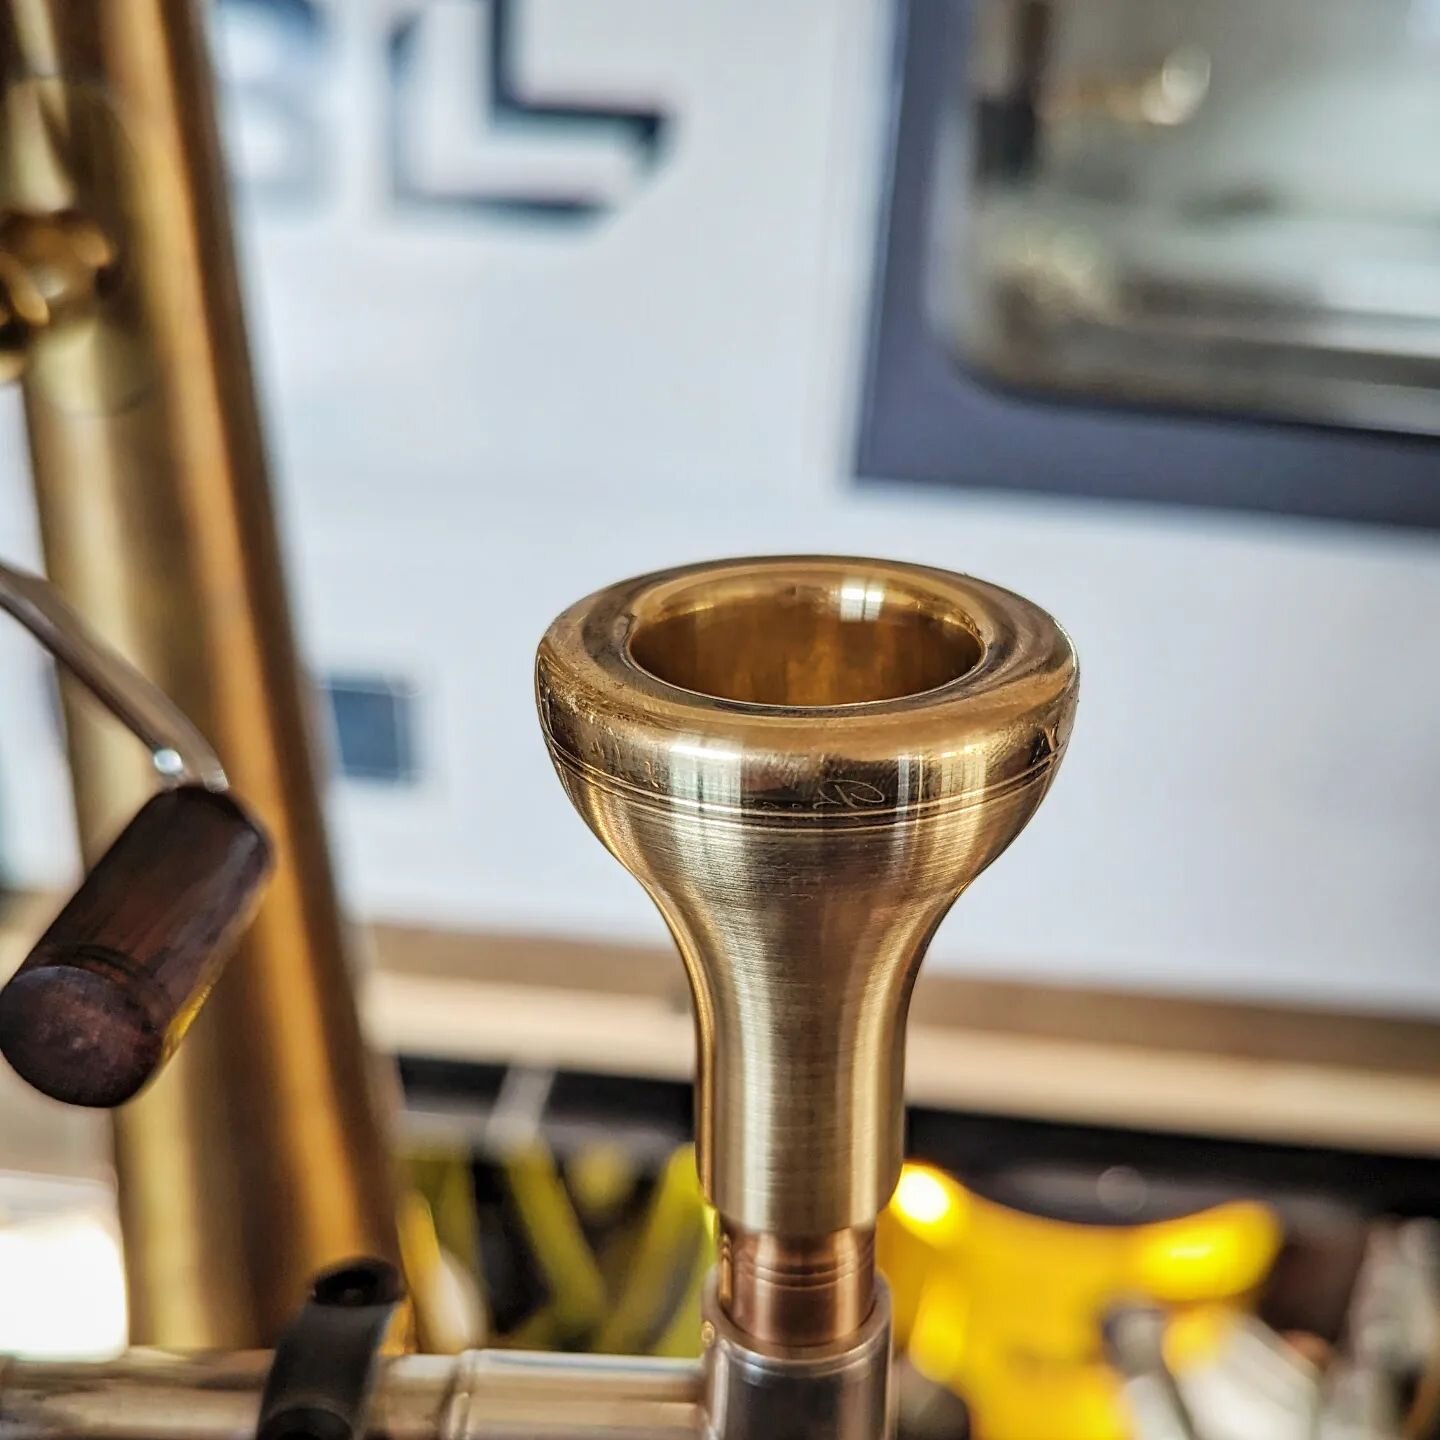 Sometimes it's fun to create the unexpected. Deep bass bone cup, .310&quot; throat, and a 25.5mm rim. Yup, Bach 5g sized rim on a bass trombone mouthpiece, and it cranks out a beautiful sound too! 🤯

Have a custom mouthpiece idea you'd like to have 